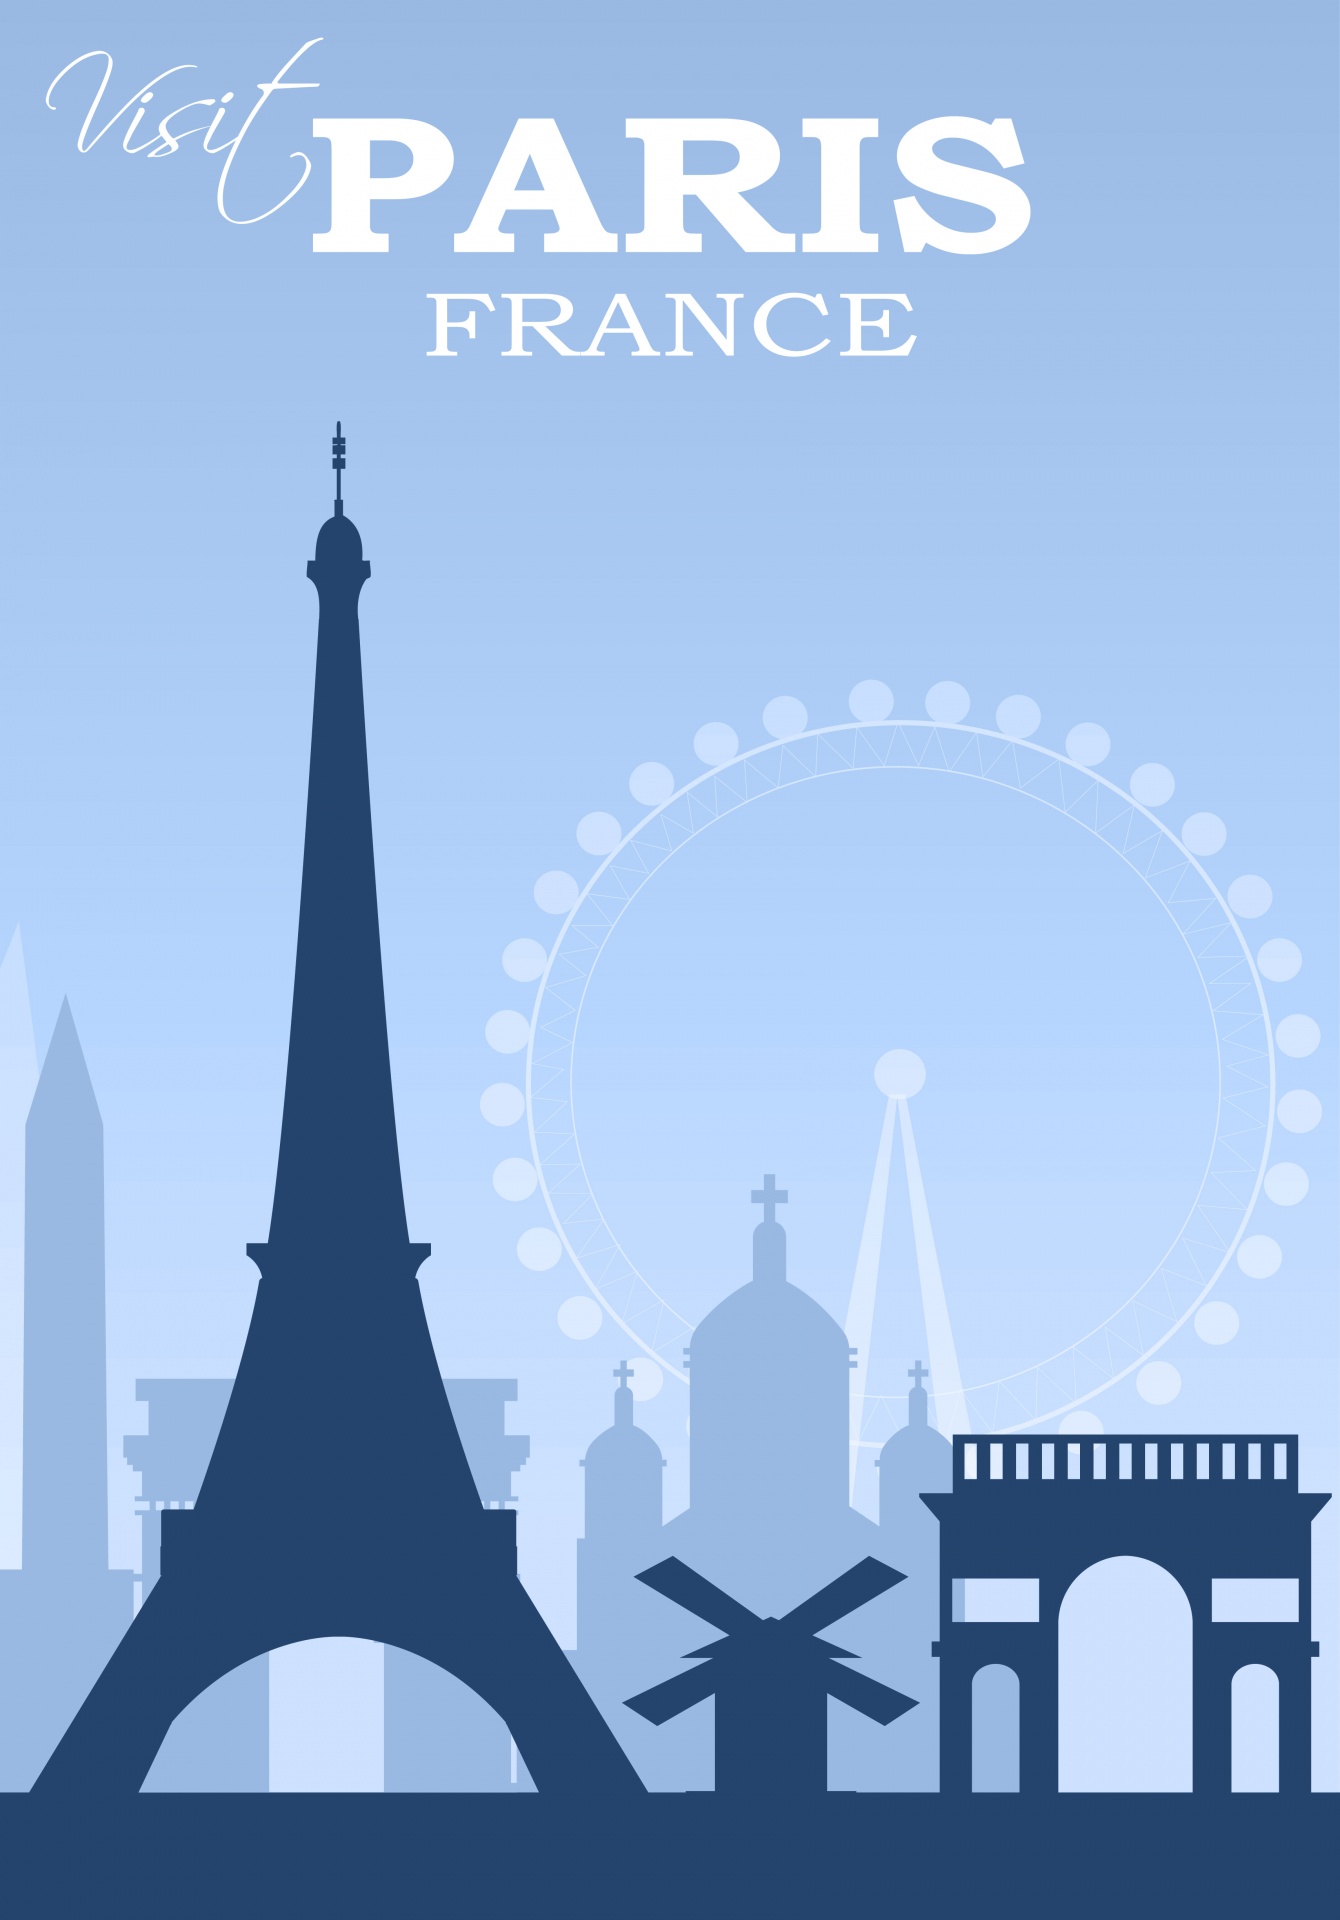 Modern travel Poster for Paris, France in blue tones with city skyline and landmarks backdrop